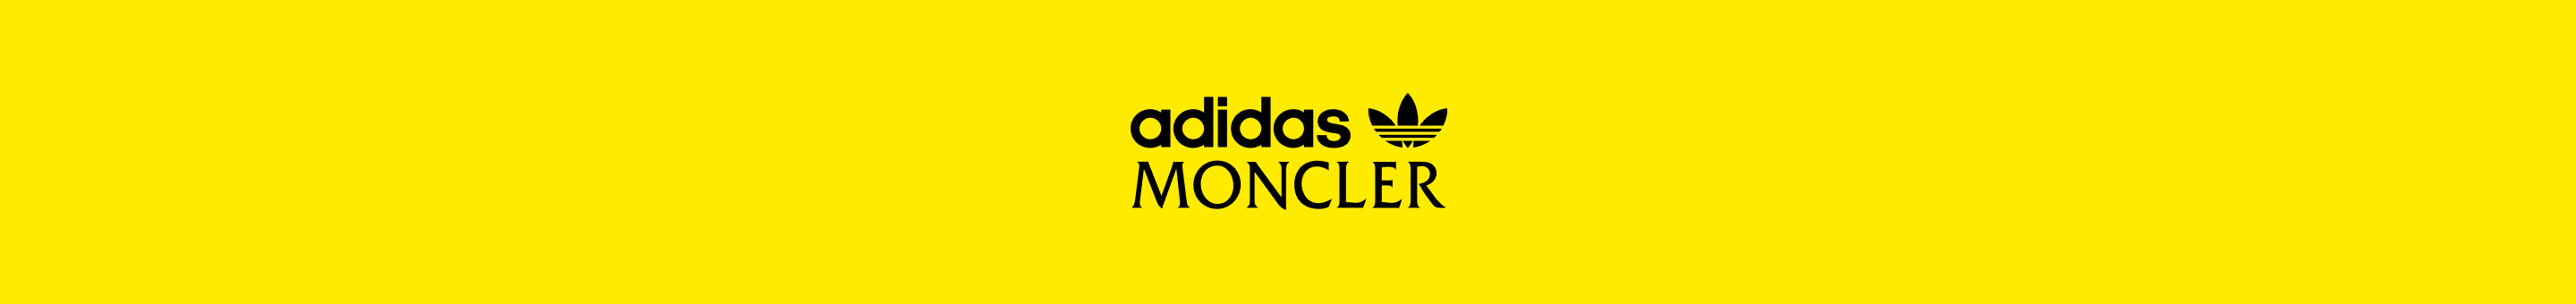 The Moncler Genius by adidas Originals logo is displayed against a yellow background.